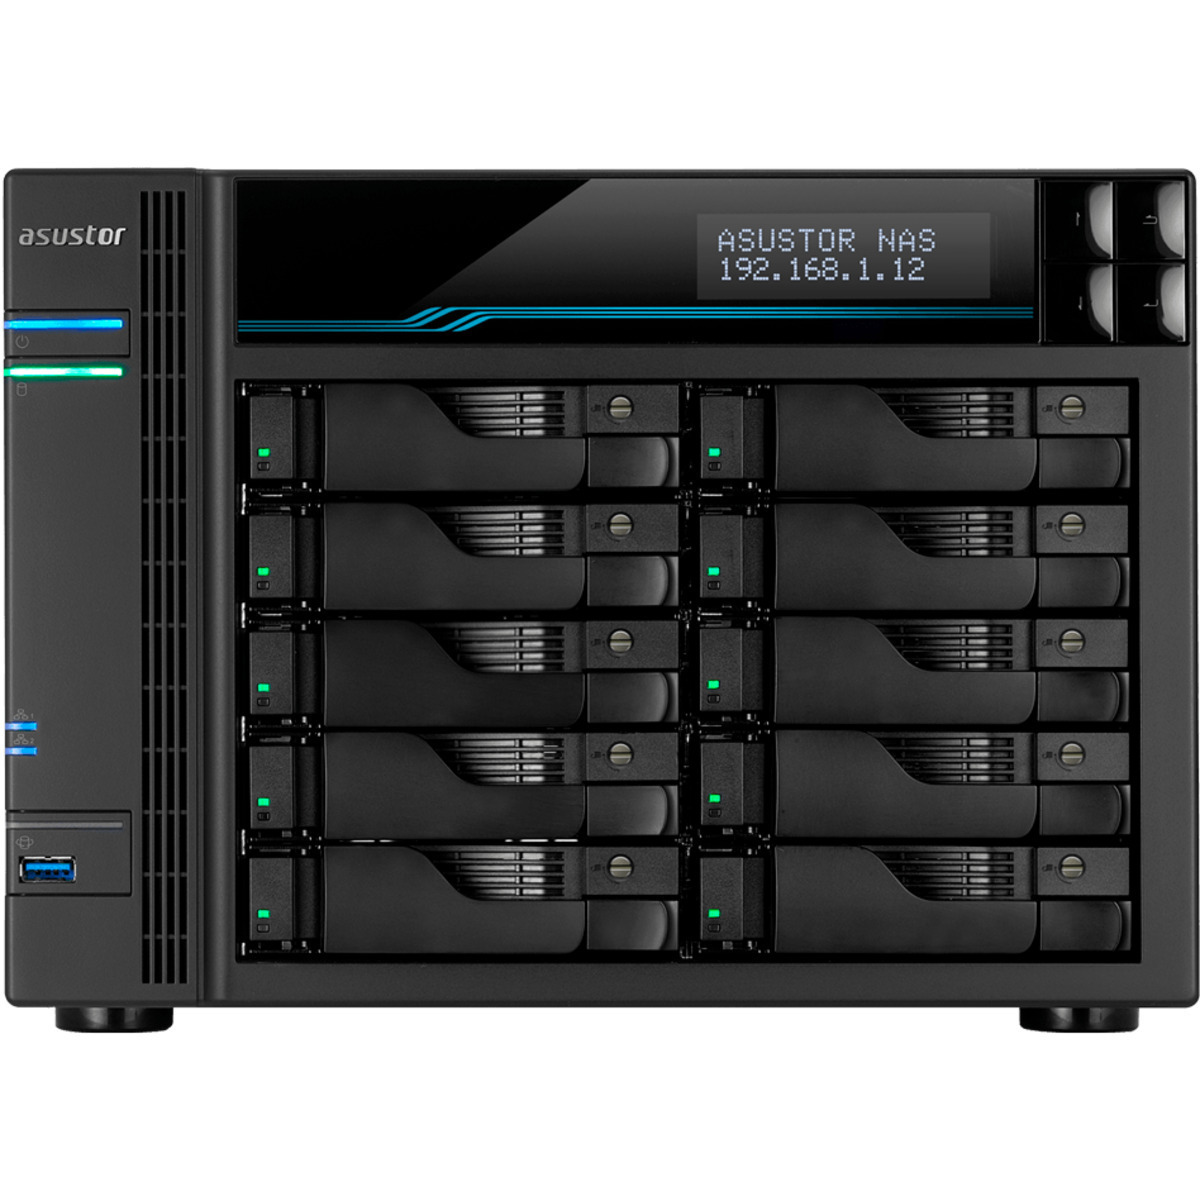 ASUSTOR AS7110T Lockerstor 10 Pro 80tb 10-Bay Desktop Multimedia / Power User / Business NAS - Network Attached Storage Device 10x8tb Samsung 870 QVO MZ-77Q8T0 2.5 560/530MB/s SATA 6Gb/s SSD CONSUMER Class Drives Installed - Burn-In Tested AS7110T Lockerstor 10 Pro